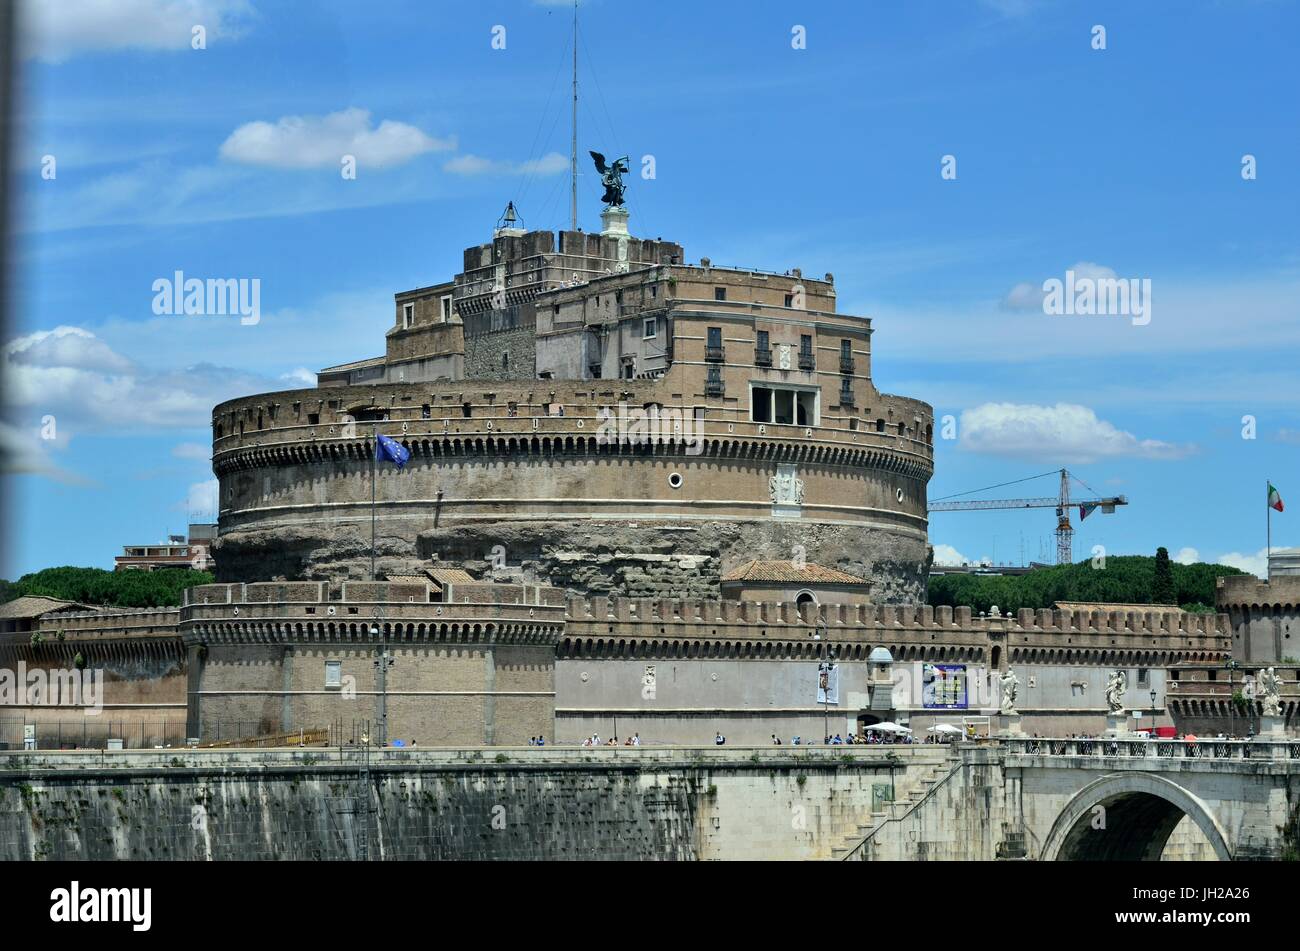 The Mausoleum of Hadrian, usually known as Castel Sant'Angelo is a towering cylindrical building in Parco Adriano, Rome, Italy. Stock Photo